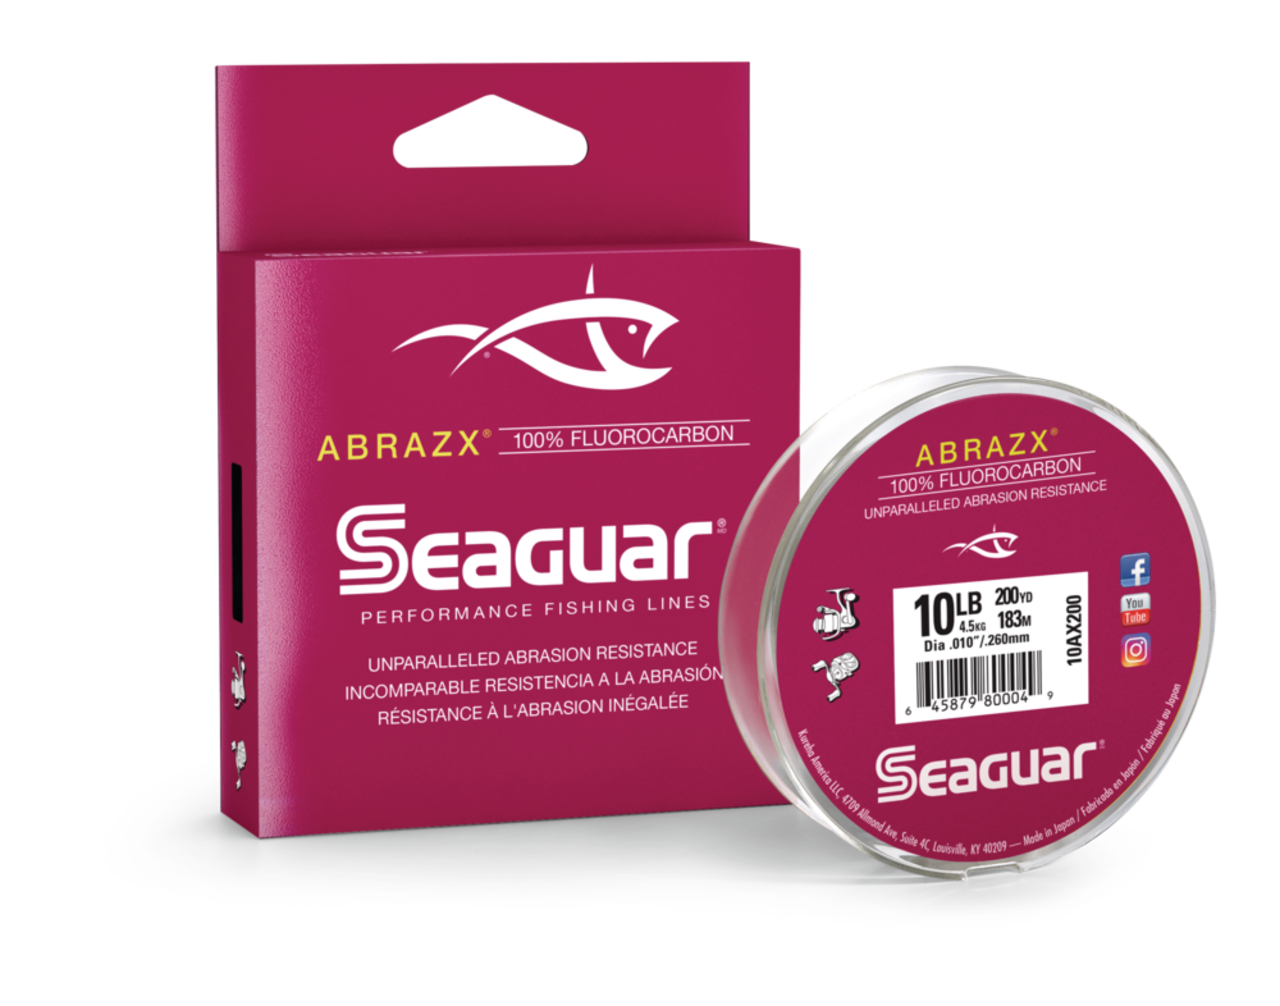 Seaguar AbrazX Fluorocarbon Fishing Line, Clear